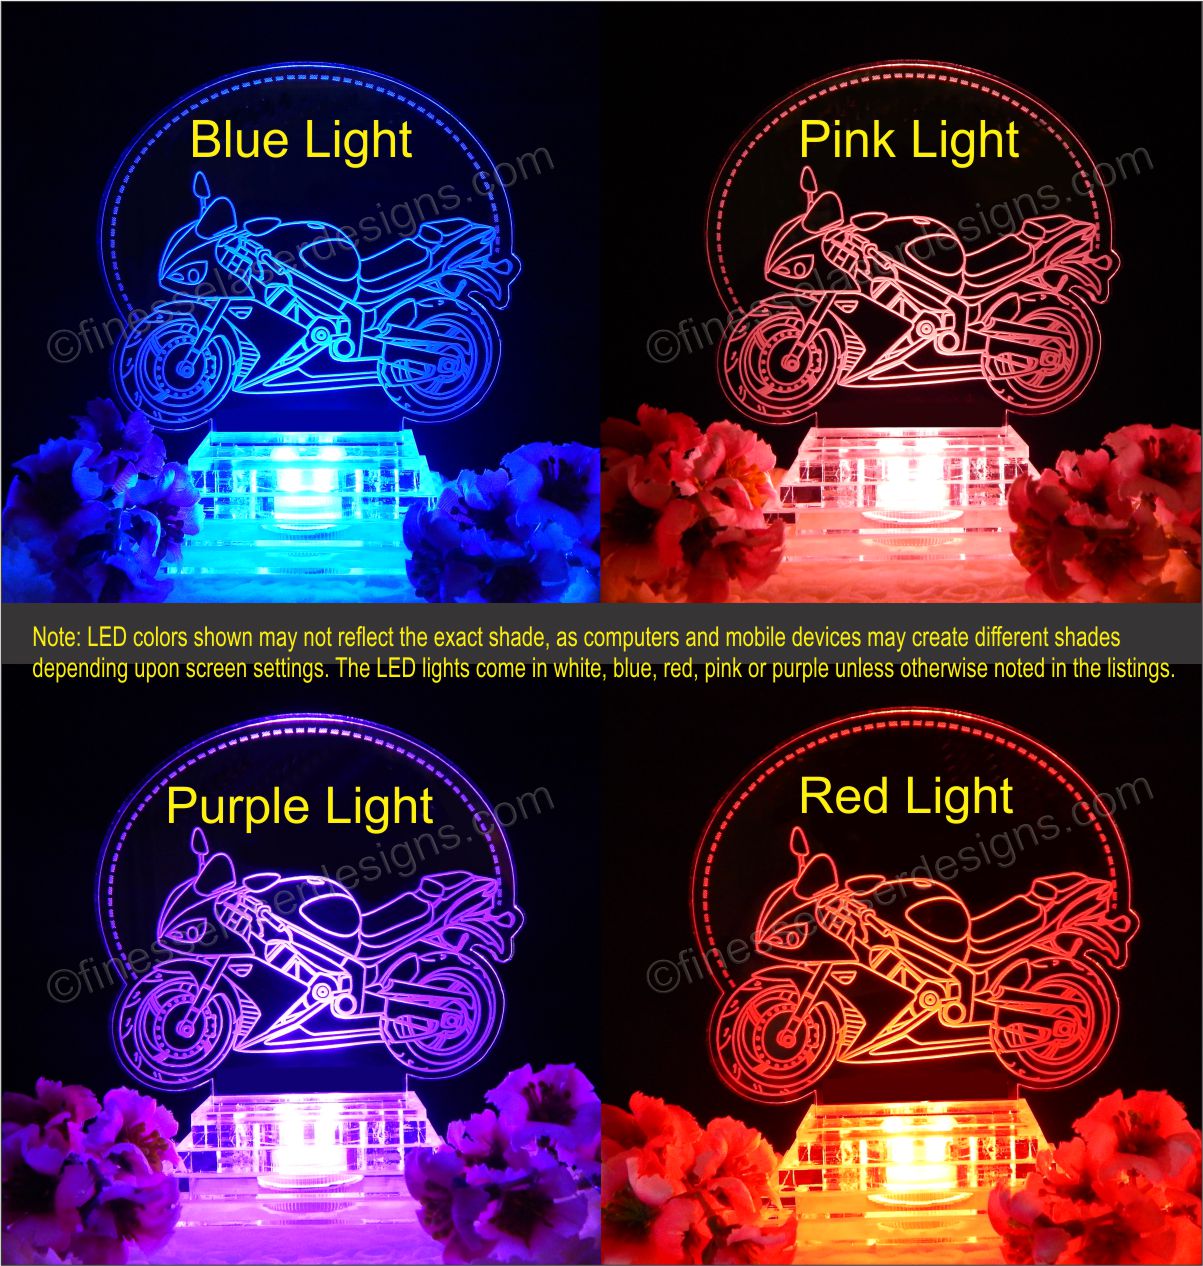 Colored lights view showing acrylic cake topper with side view of a sport motorcycle, showing blue, pink, purple, and red lighted views